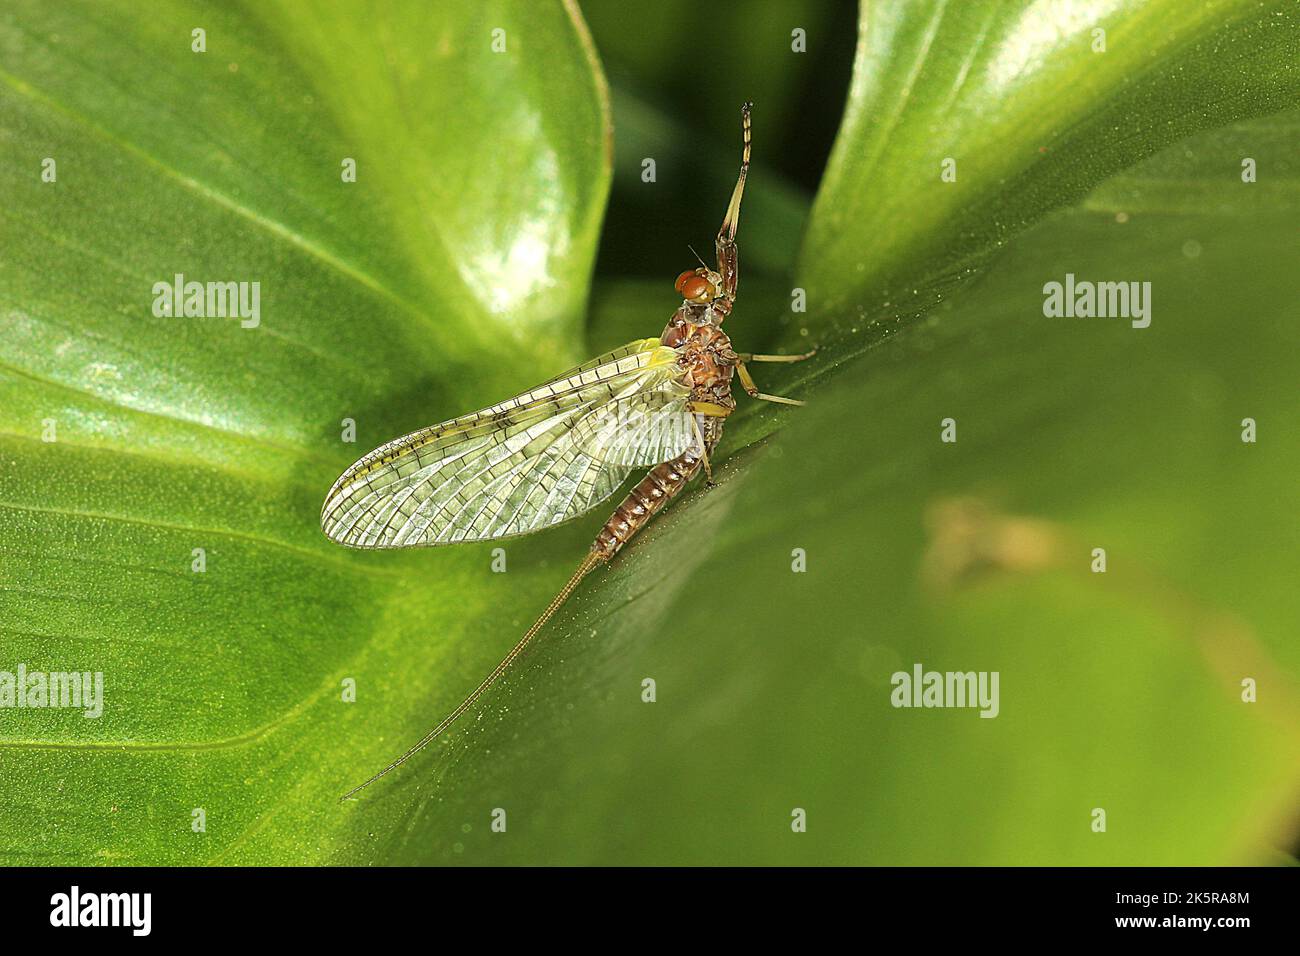 Spiny gilled mayfly (Coloburiscus humeralis) Stock Photo